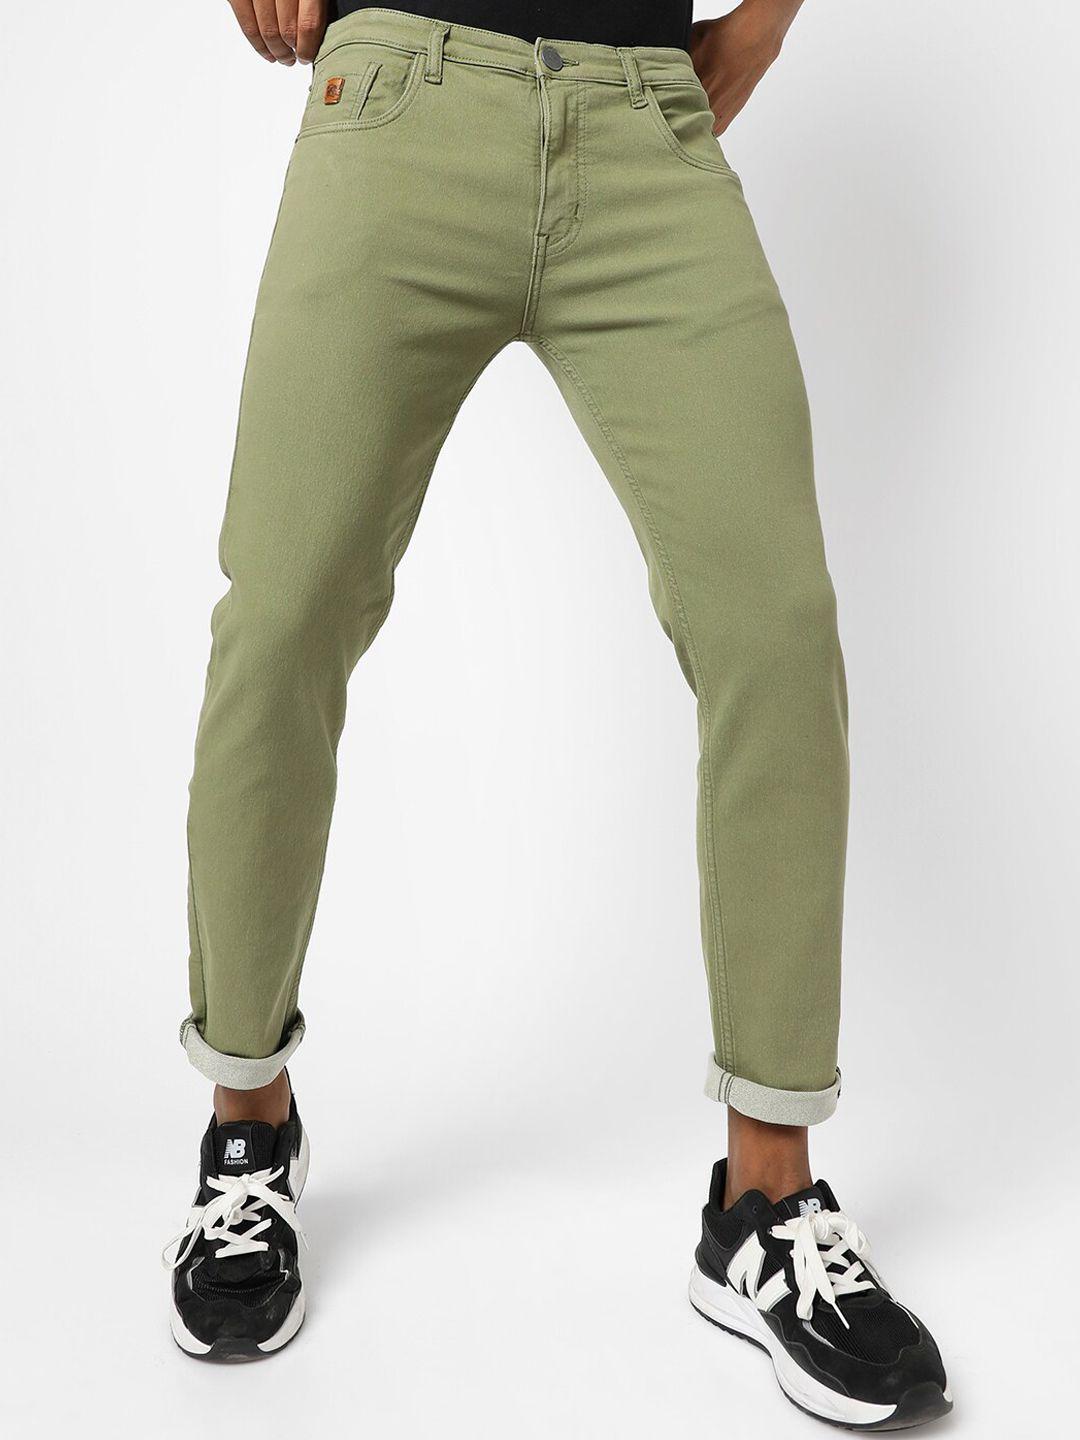 campus sutra men olive green smart slim fit stretchable jeans